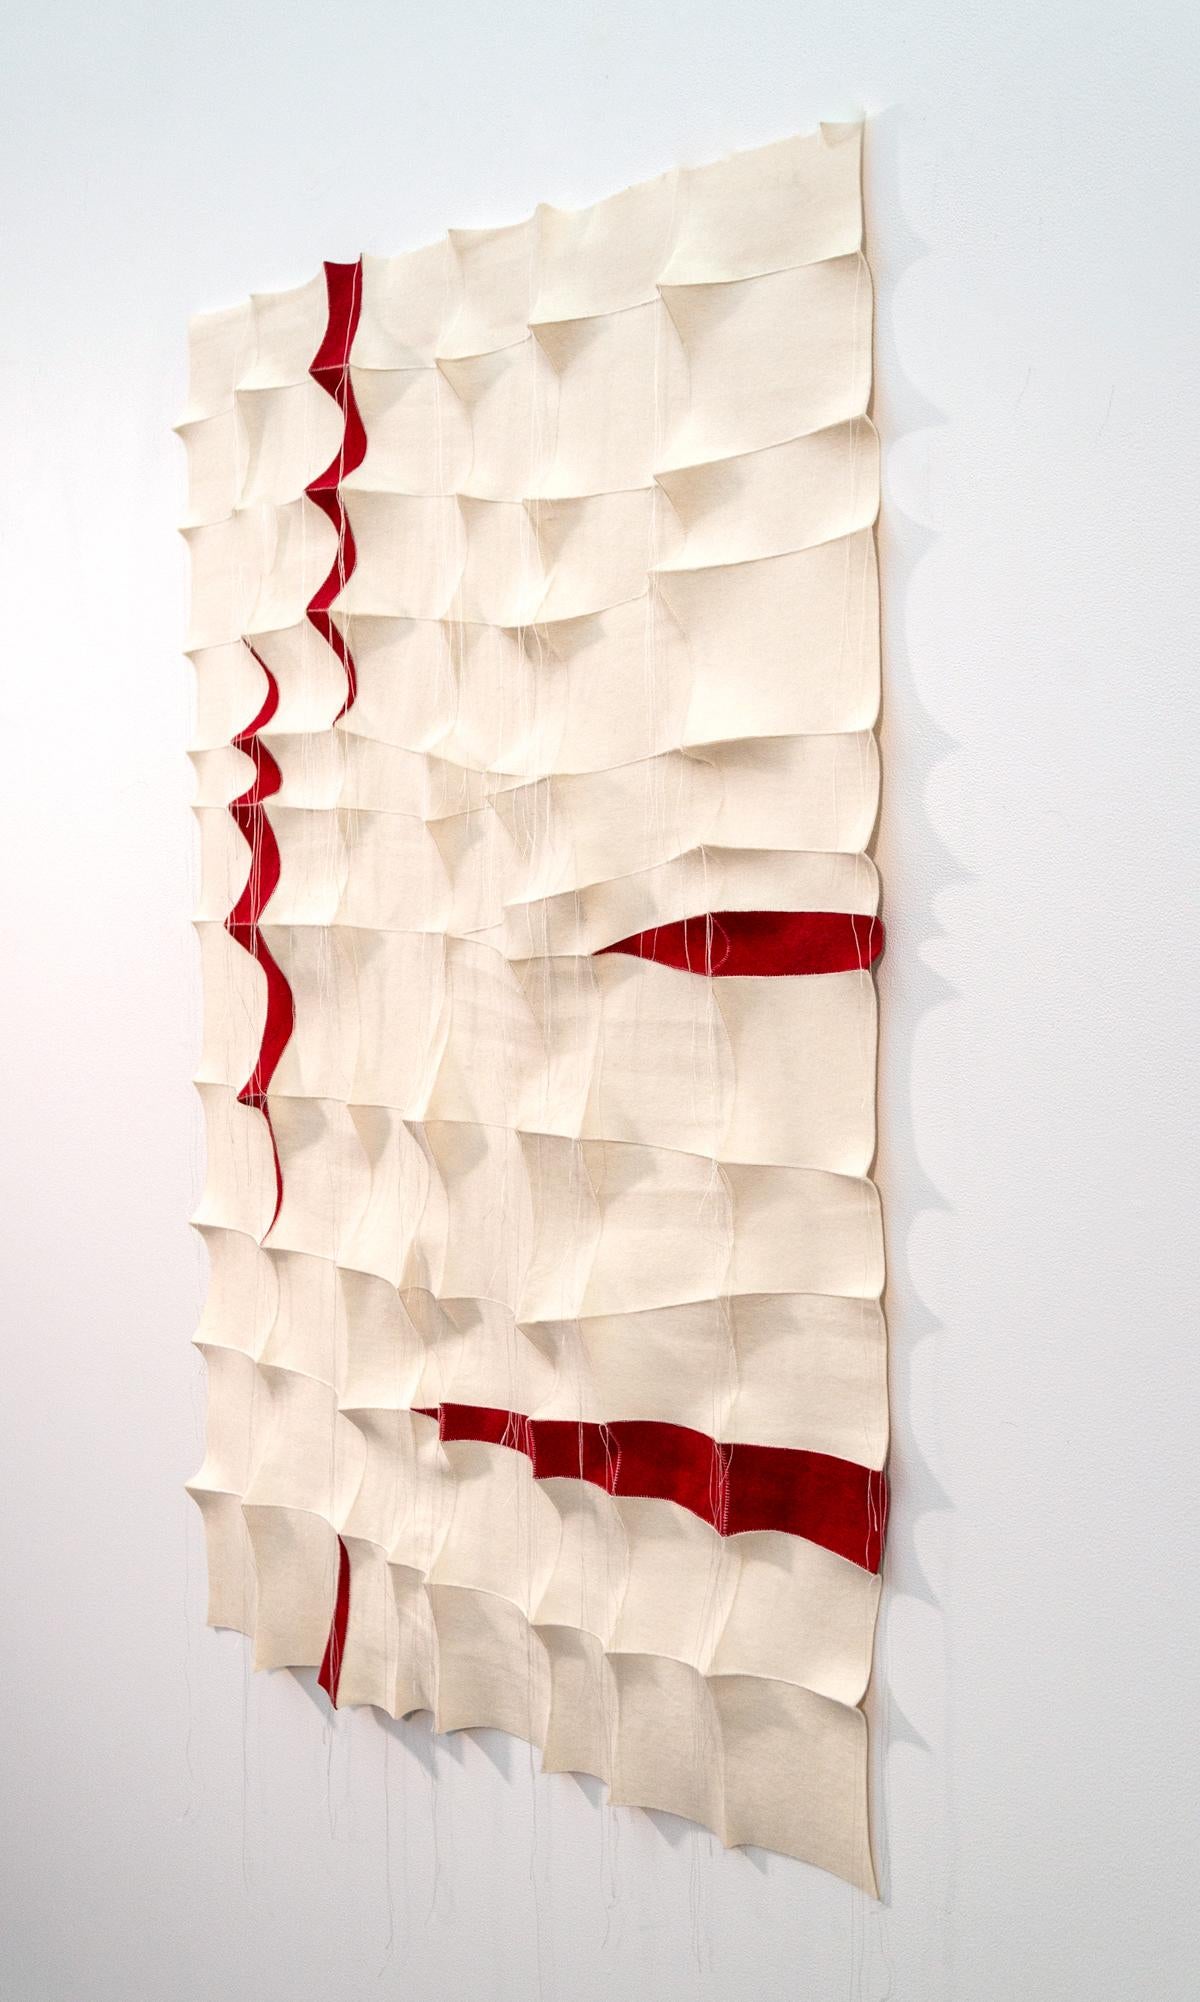 Tumsae No 1 - red, white, pattern, wall hanging, 3D, felt, textile, tapestry - Contemporary Mixed Media Art by Chung-Im Kim